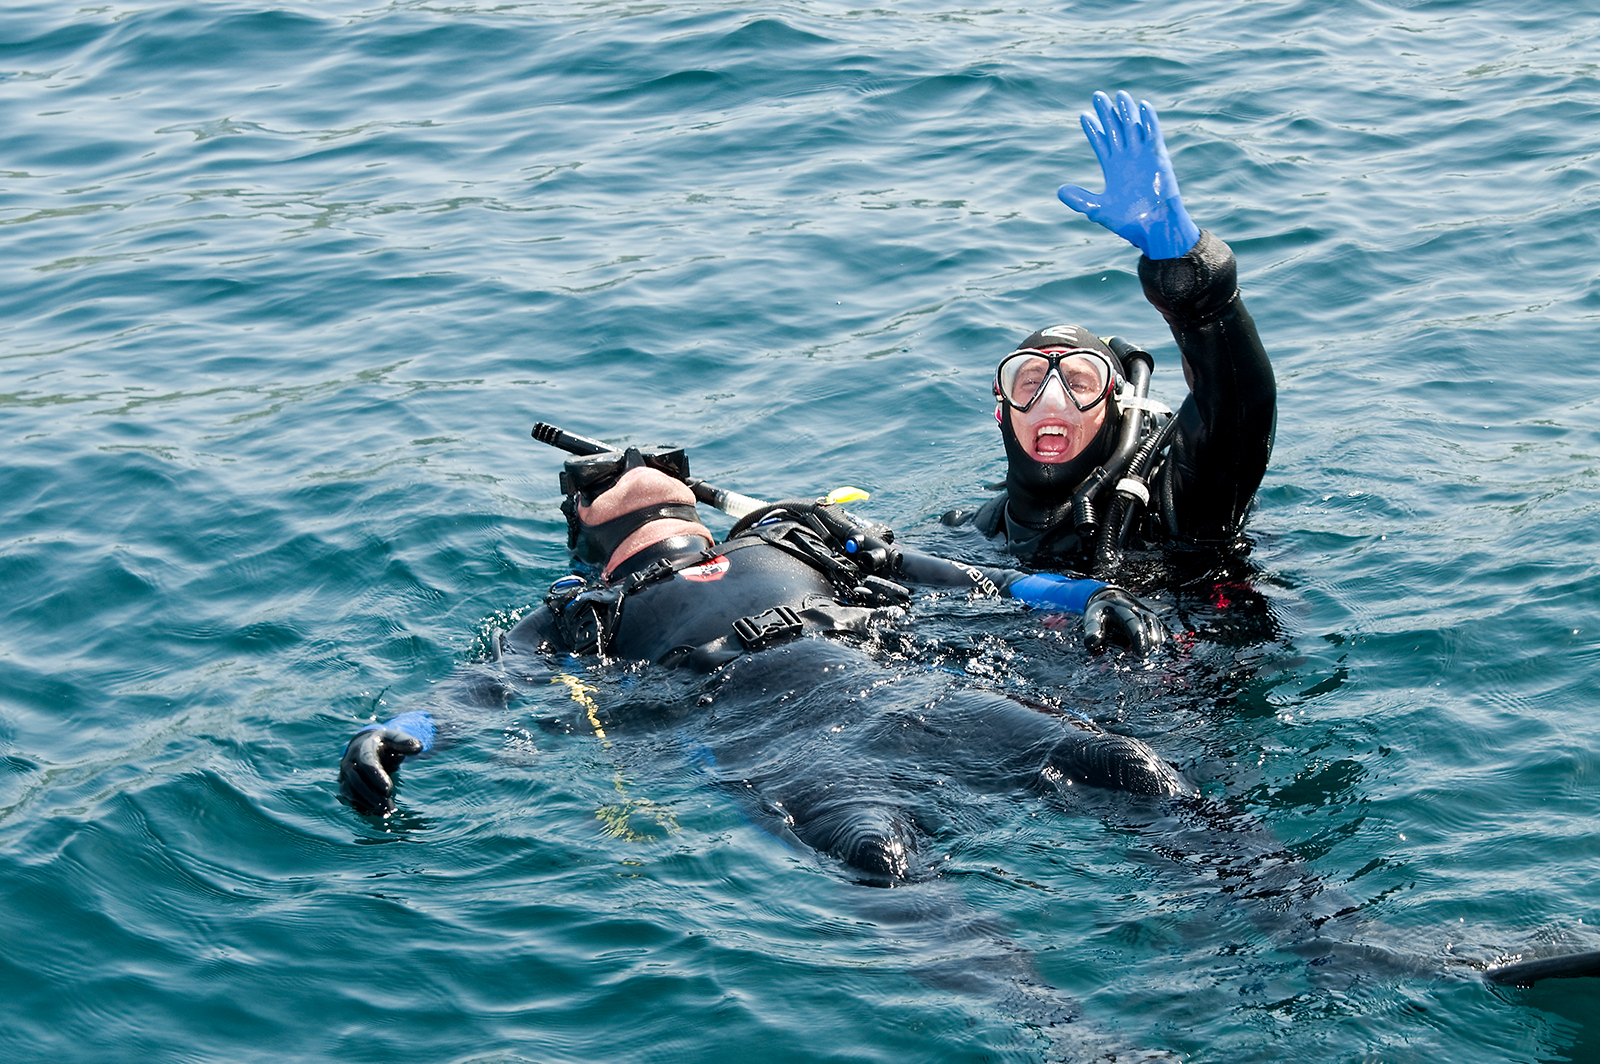 Two divers in the water practicing emergency skills as part of the PADI Rescue Diver course, one of the best PADI courses